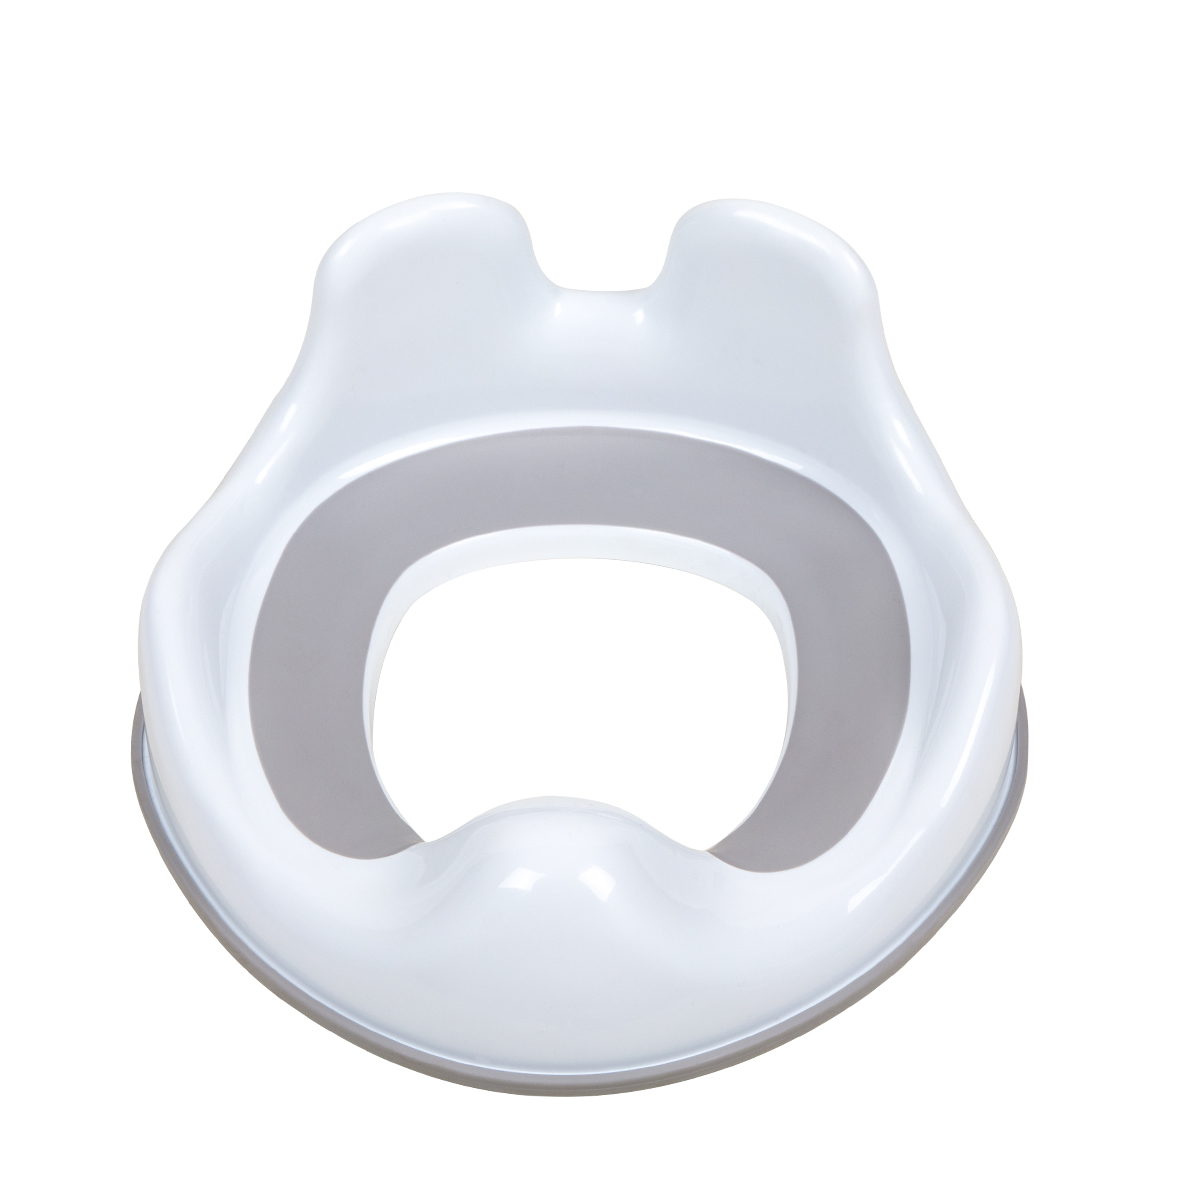 Baby crown toilet seat with handle